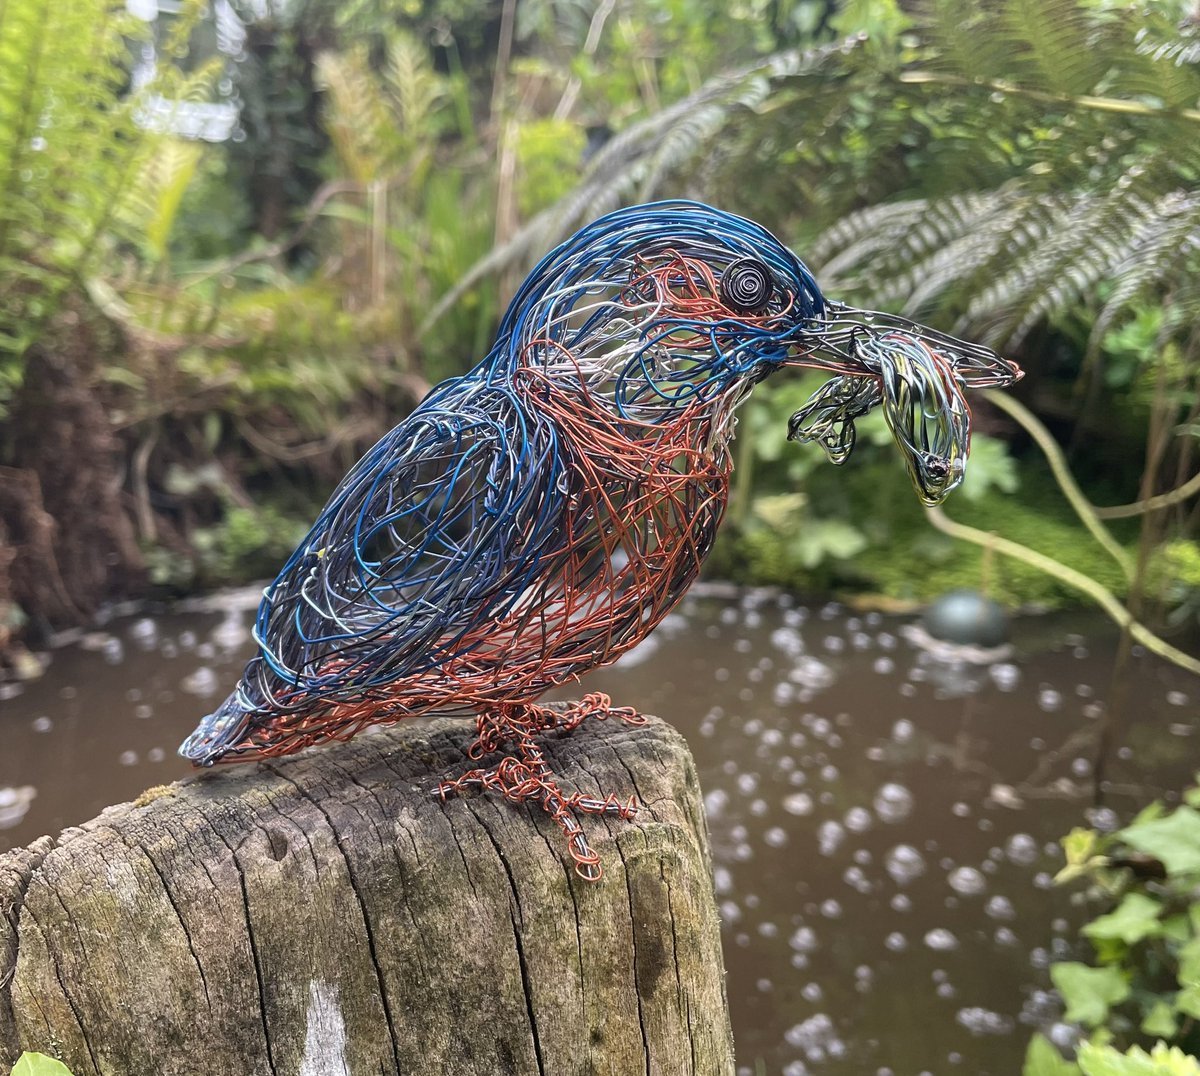 Freehand Wire Kingfisher Sculpture and Stickleback.These,like all my Sculptures are available to commission,simply contact me. #kingfisher #wirebirdsculpture #artforsale #birdartist #wireartist #wirebirdsculpture #paulgreenwildwire